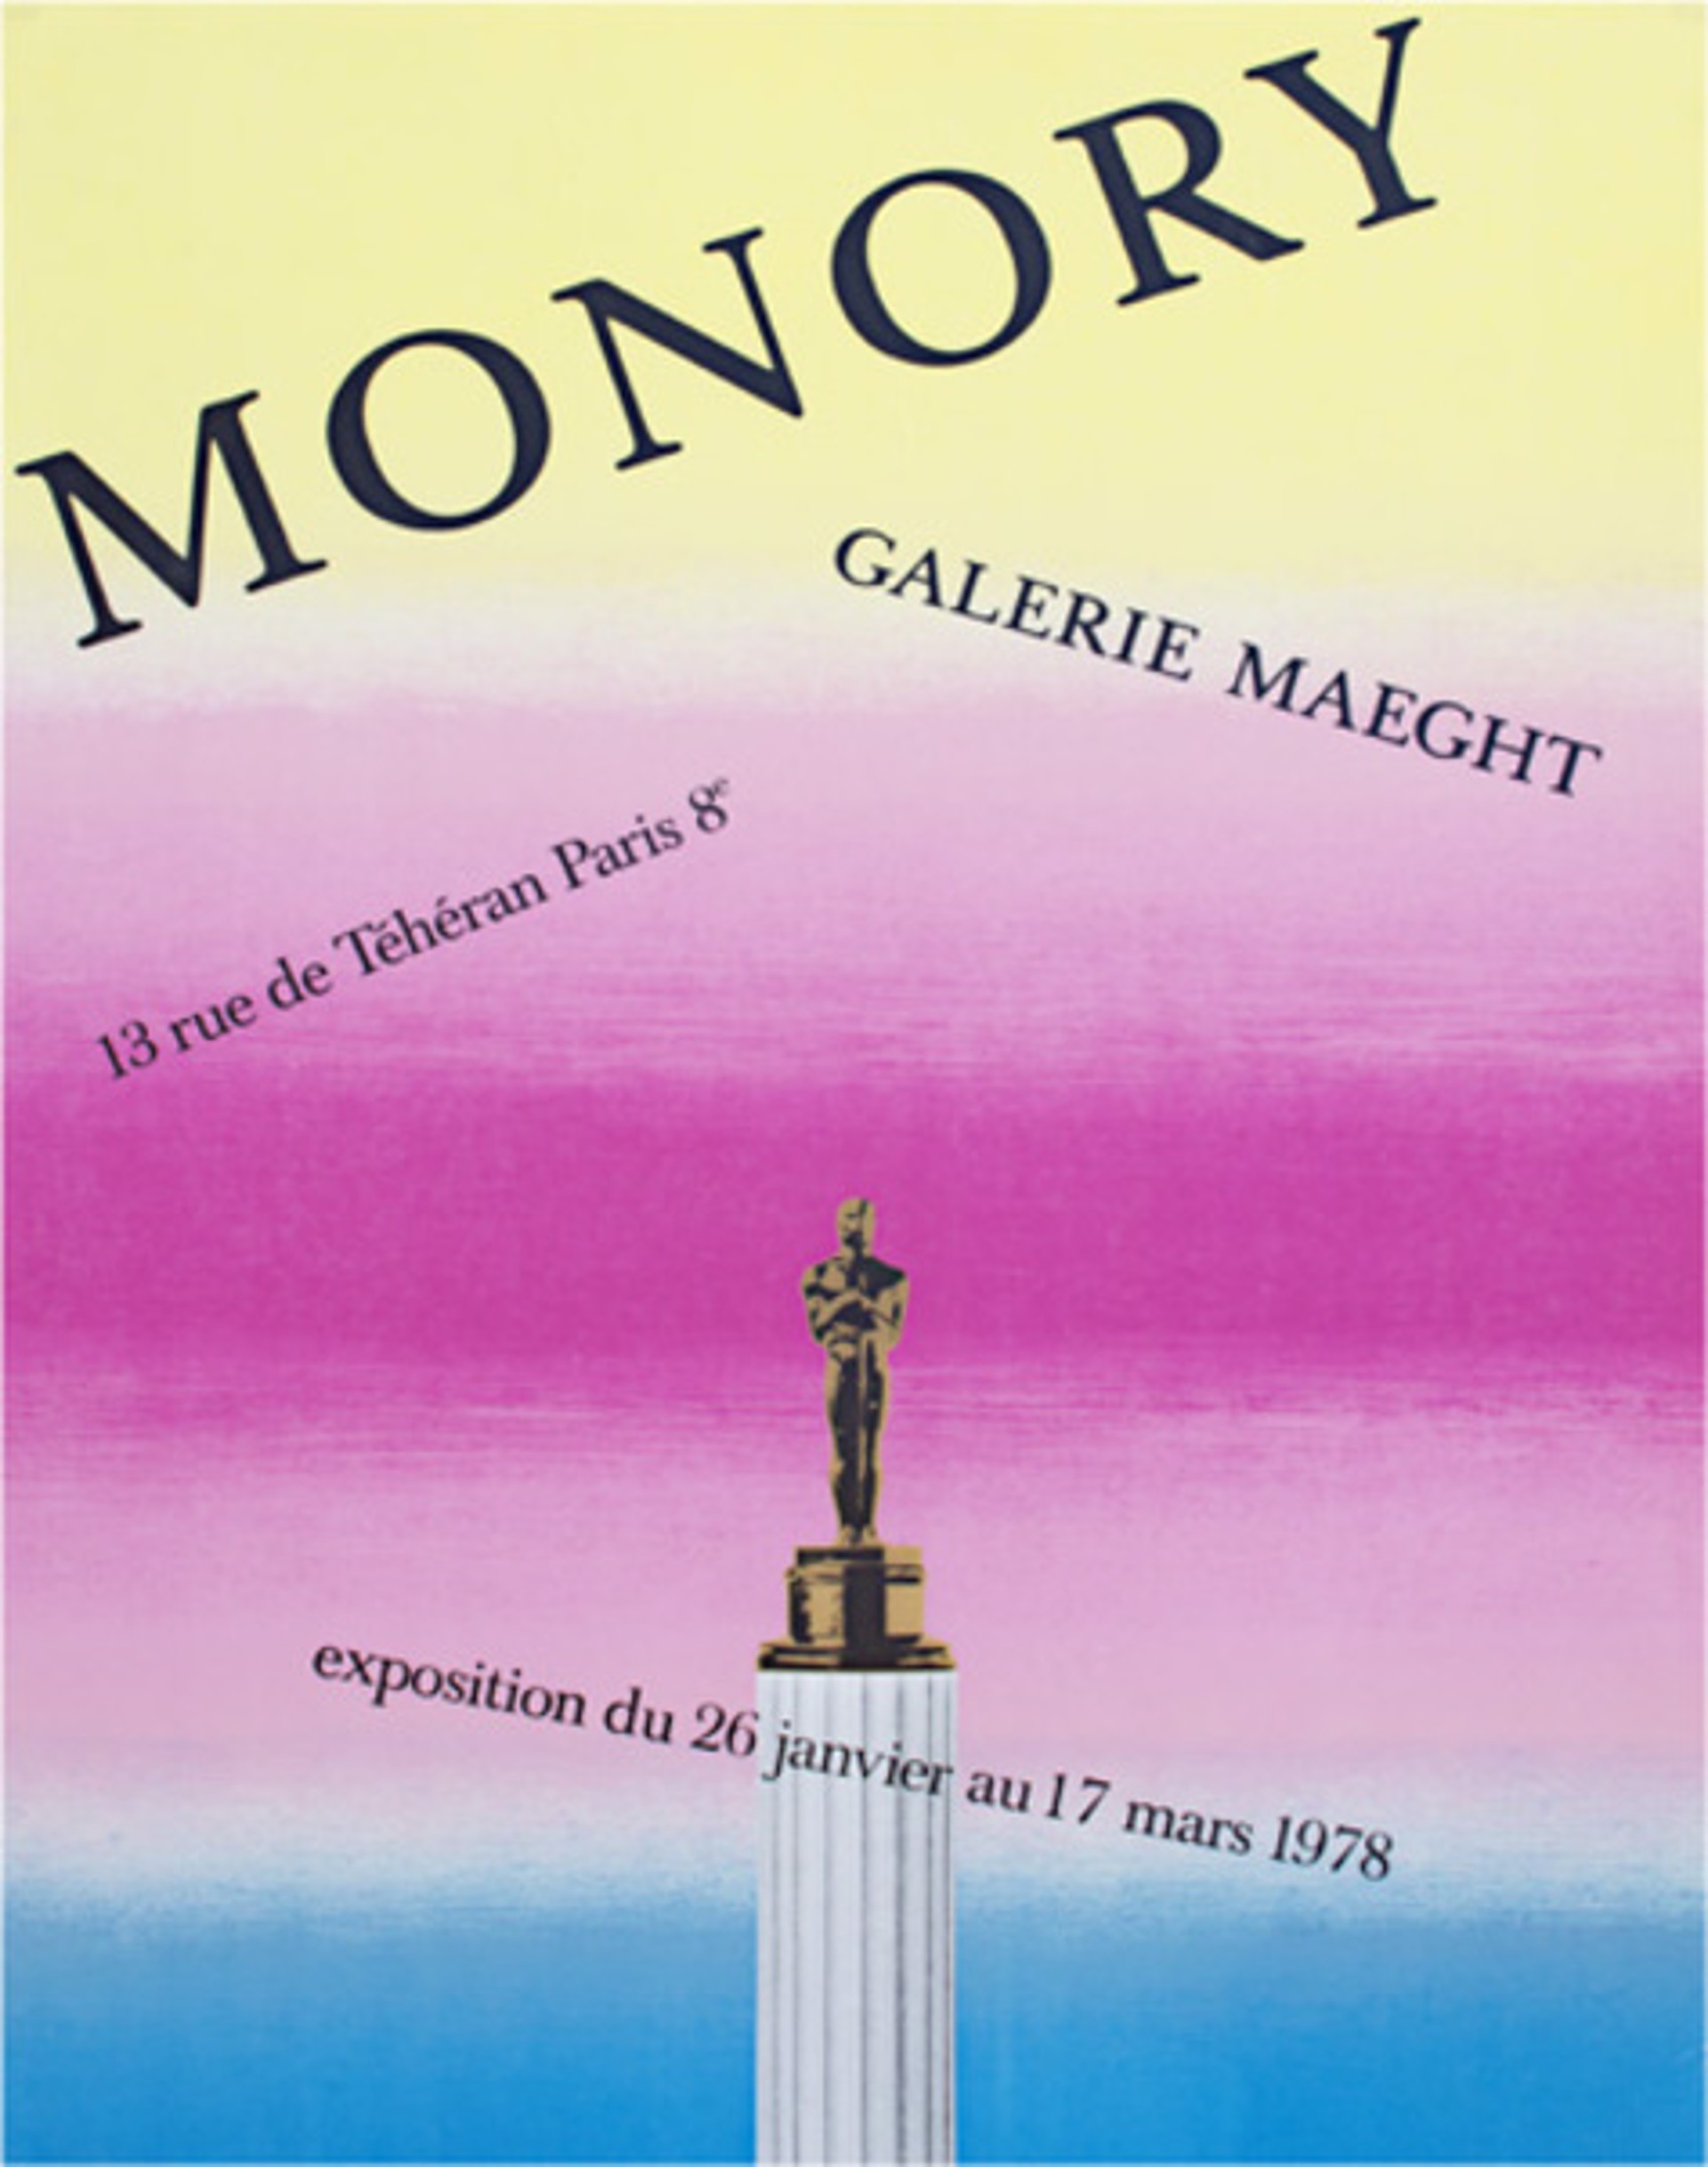 Monory - Galerie Maeght by Jacques Monory